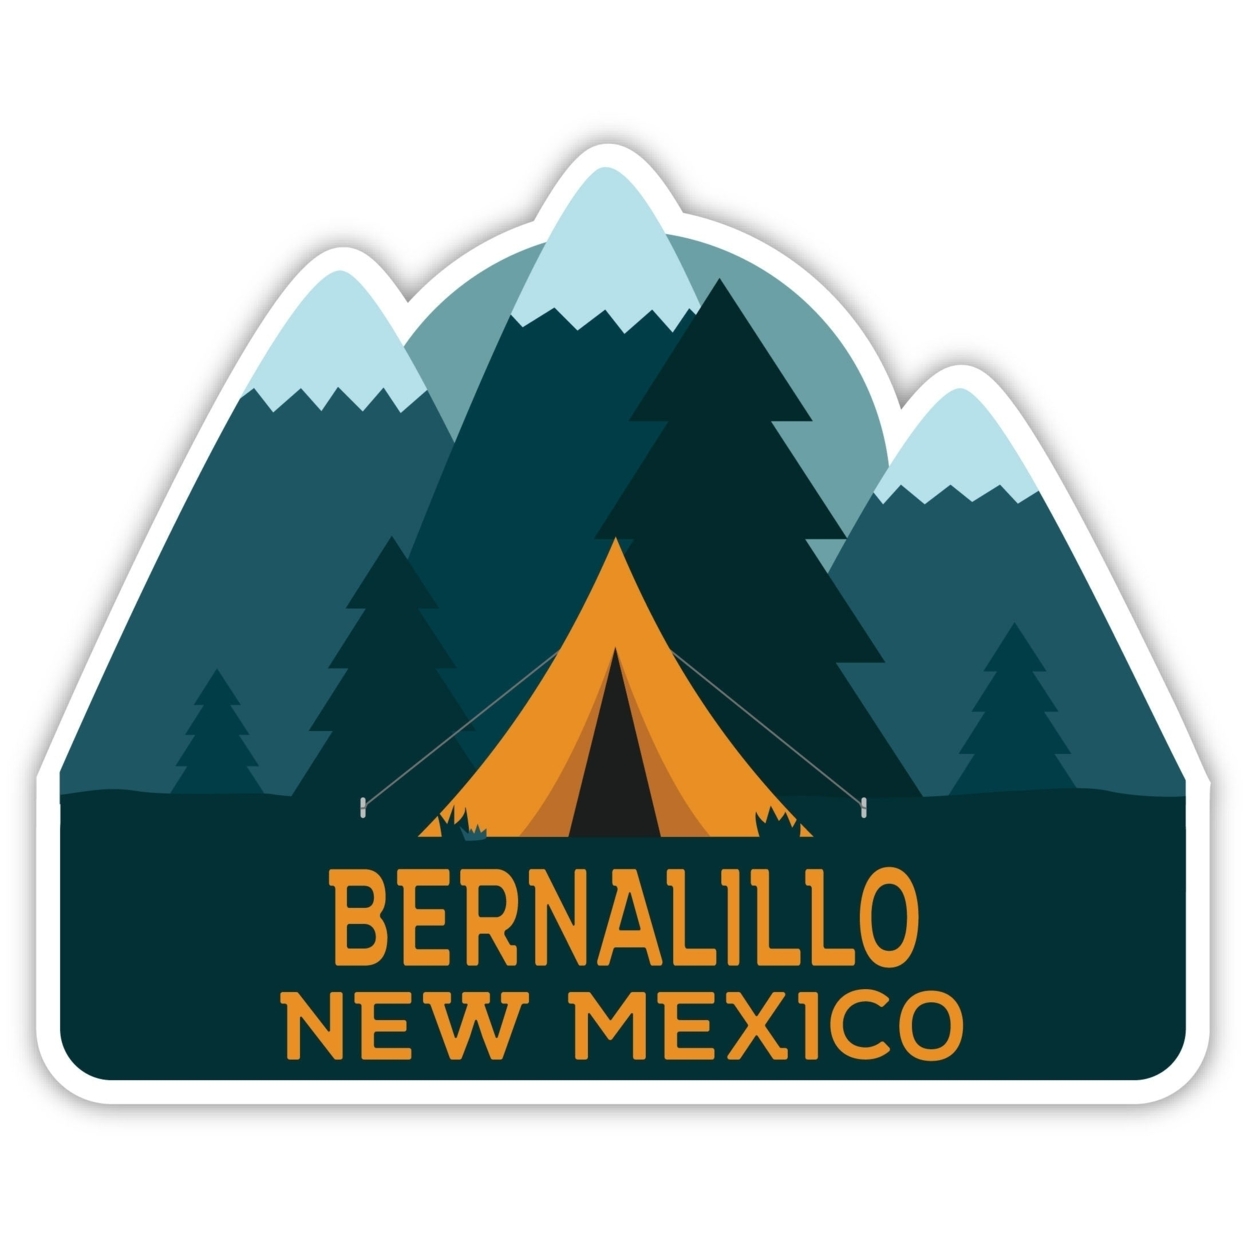 Bernalillo New Mexico Souvenir Decorative Stickers (Choose Theme And Size) - 4-Pack, 4-Inch, Bear